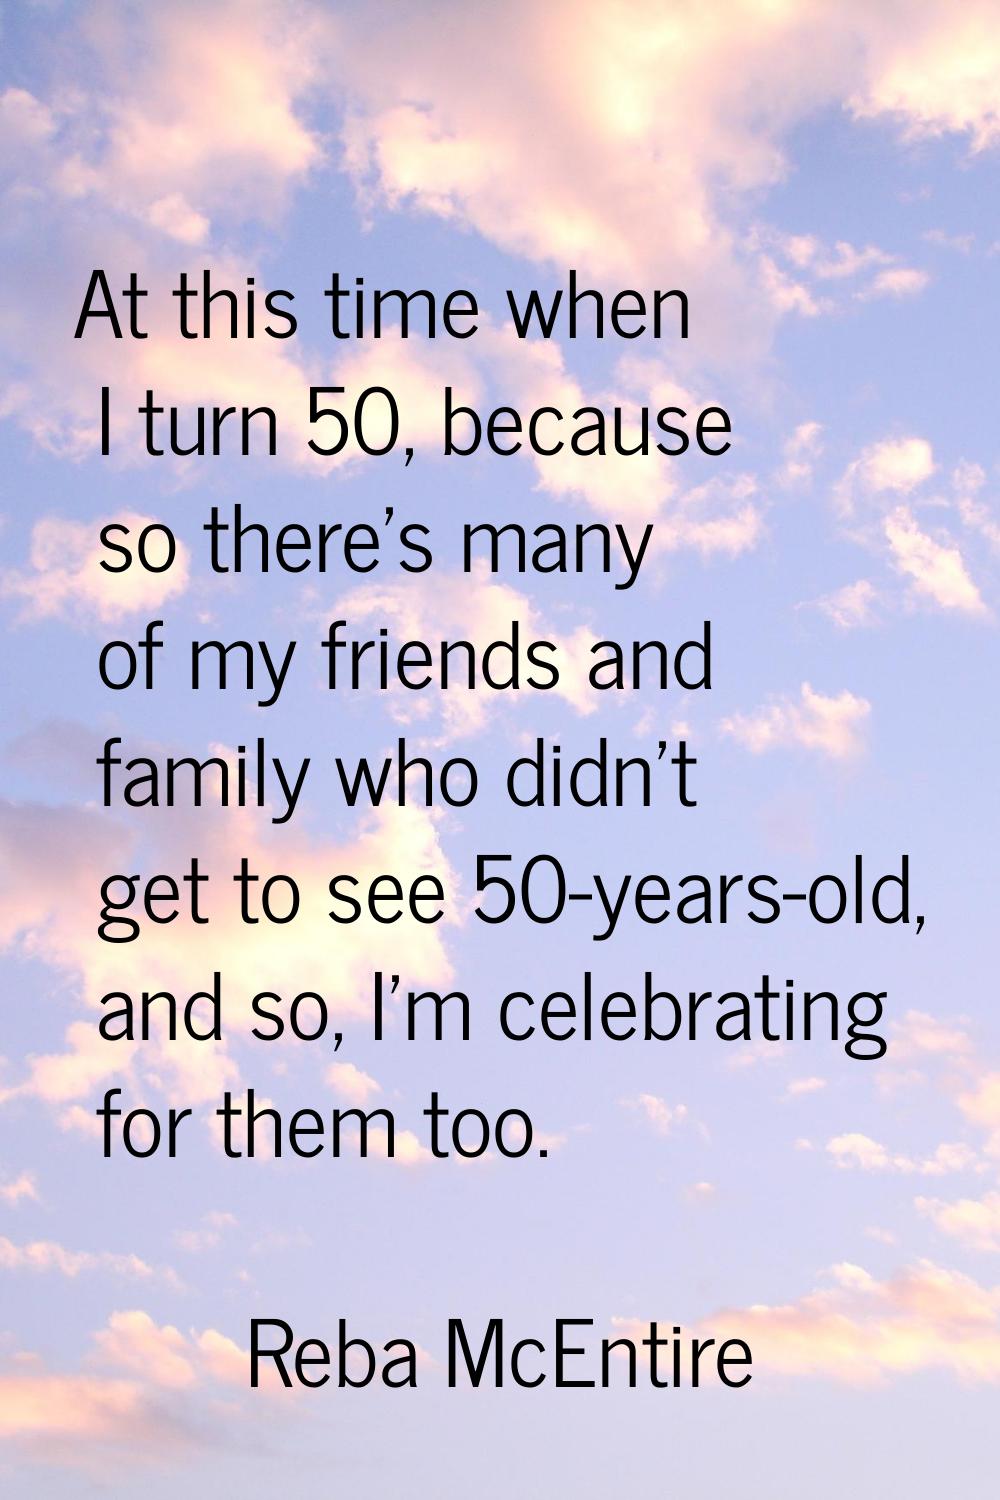 At this time when I turn 50, because so there's many of my friends and family who didn't get to see